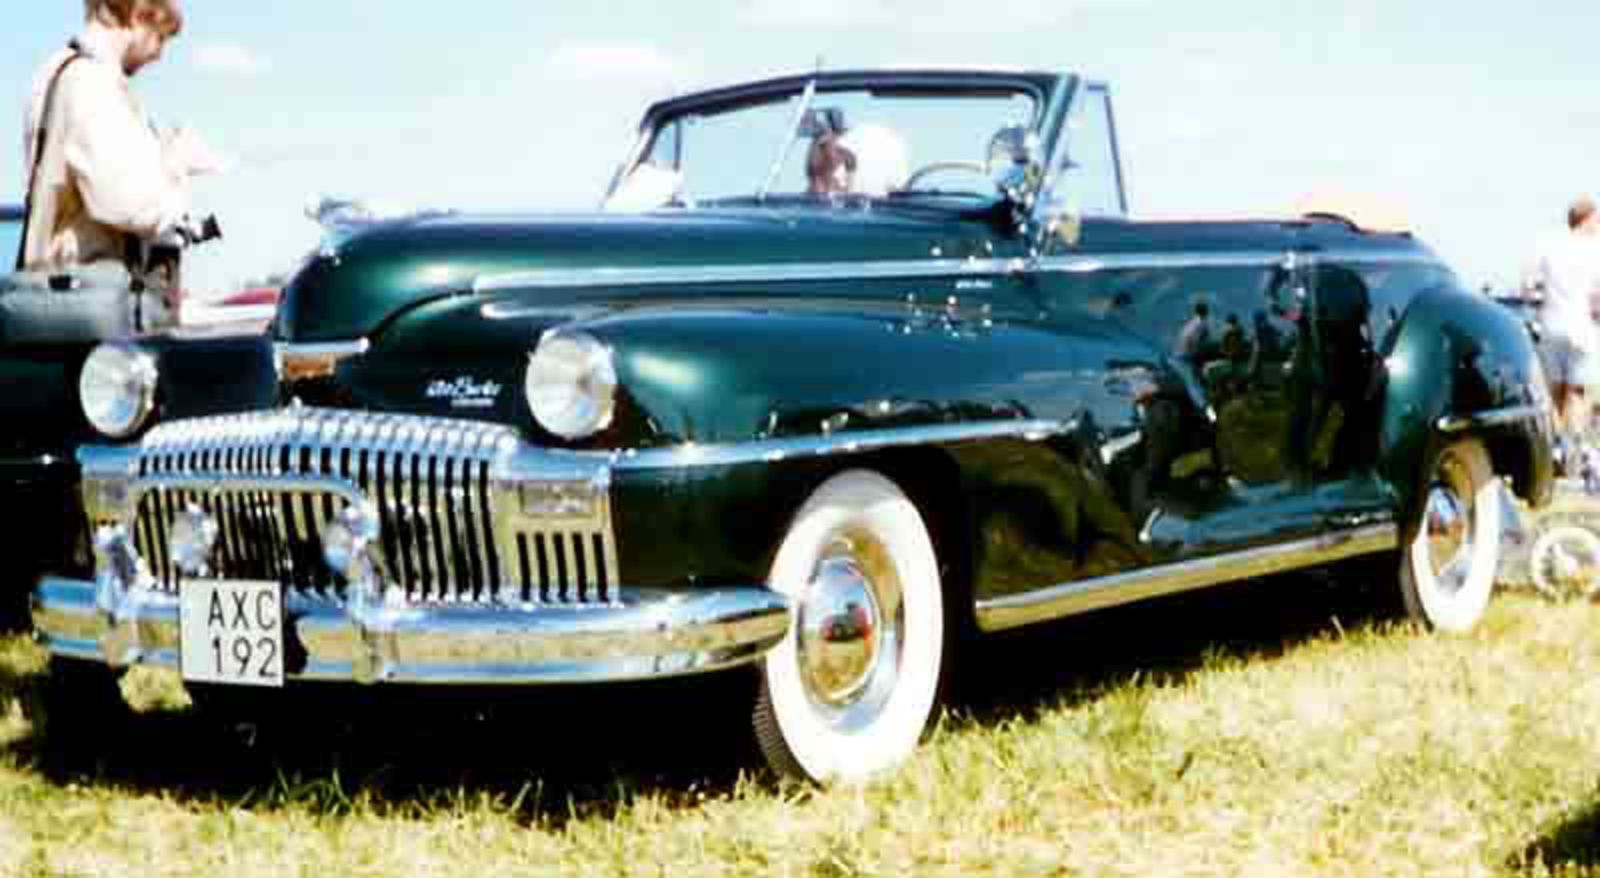 De Soto Model K Wagon Photo Gallery: Photo #12 out of 6, Image ...